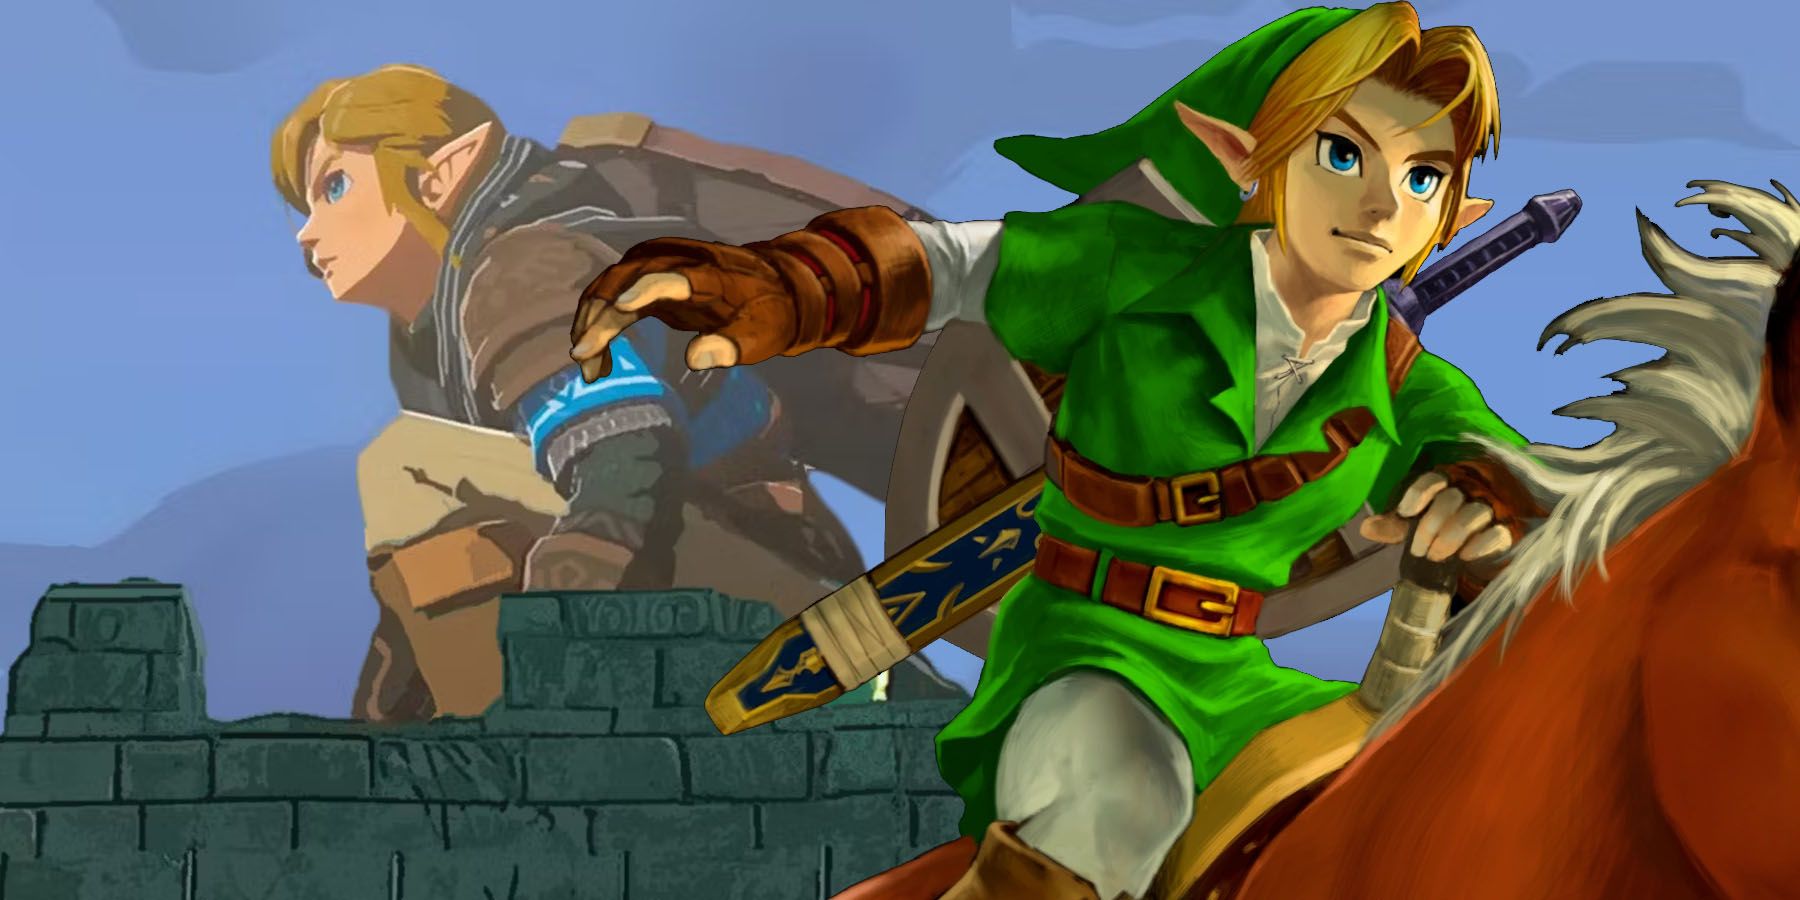 A screenshot of Link perched on a tower in The Legend of Zelda: Tears of the Kingdom, with Link from Ocarina of Time inserted beside him.